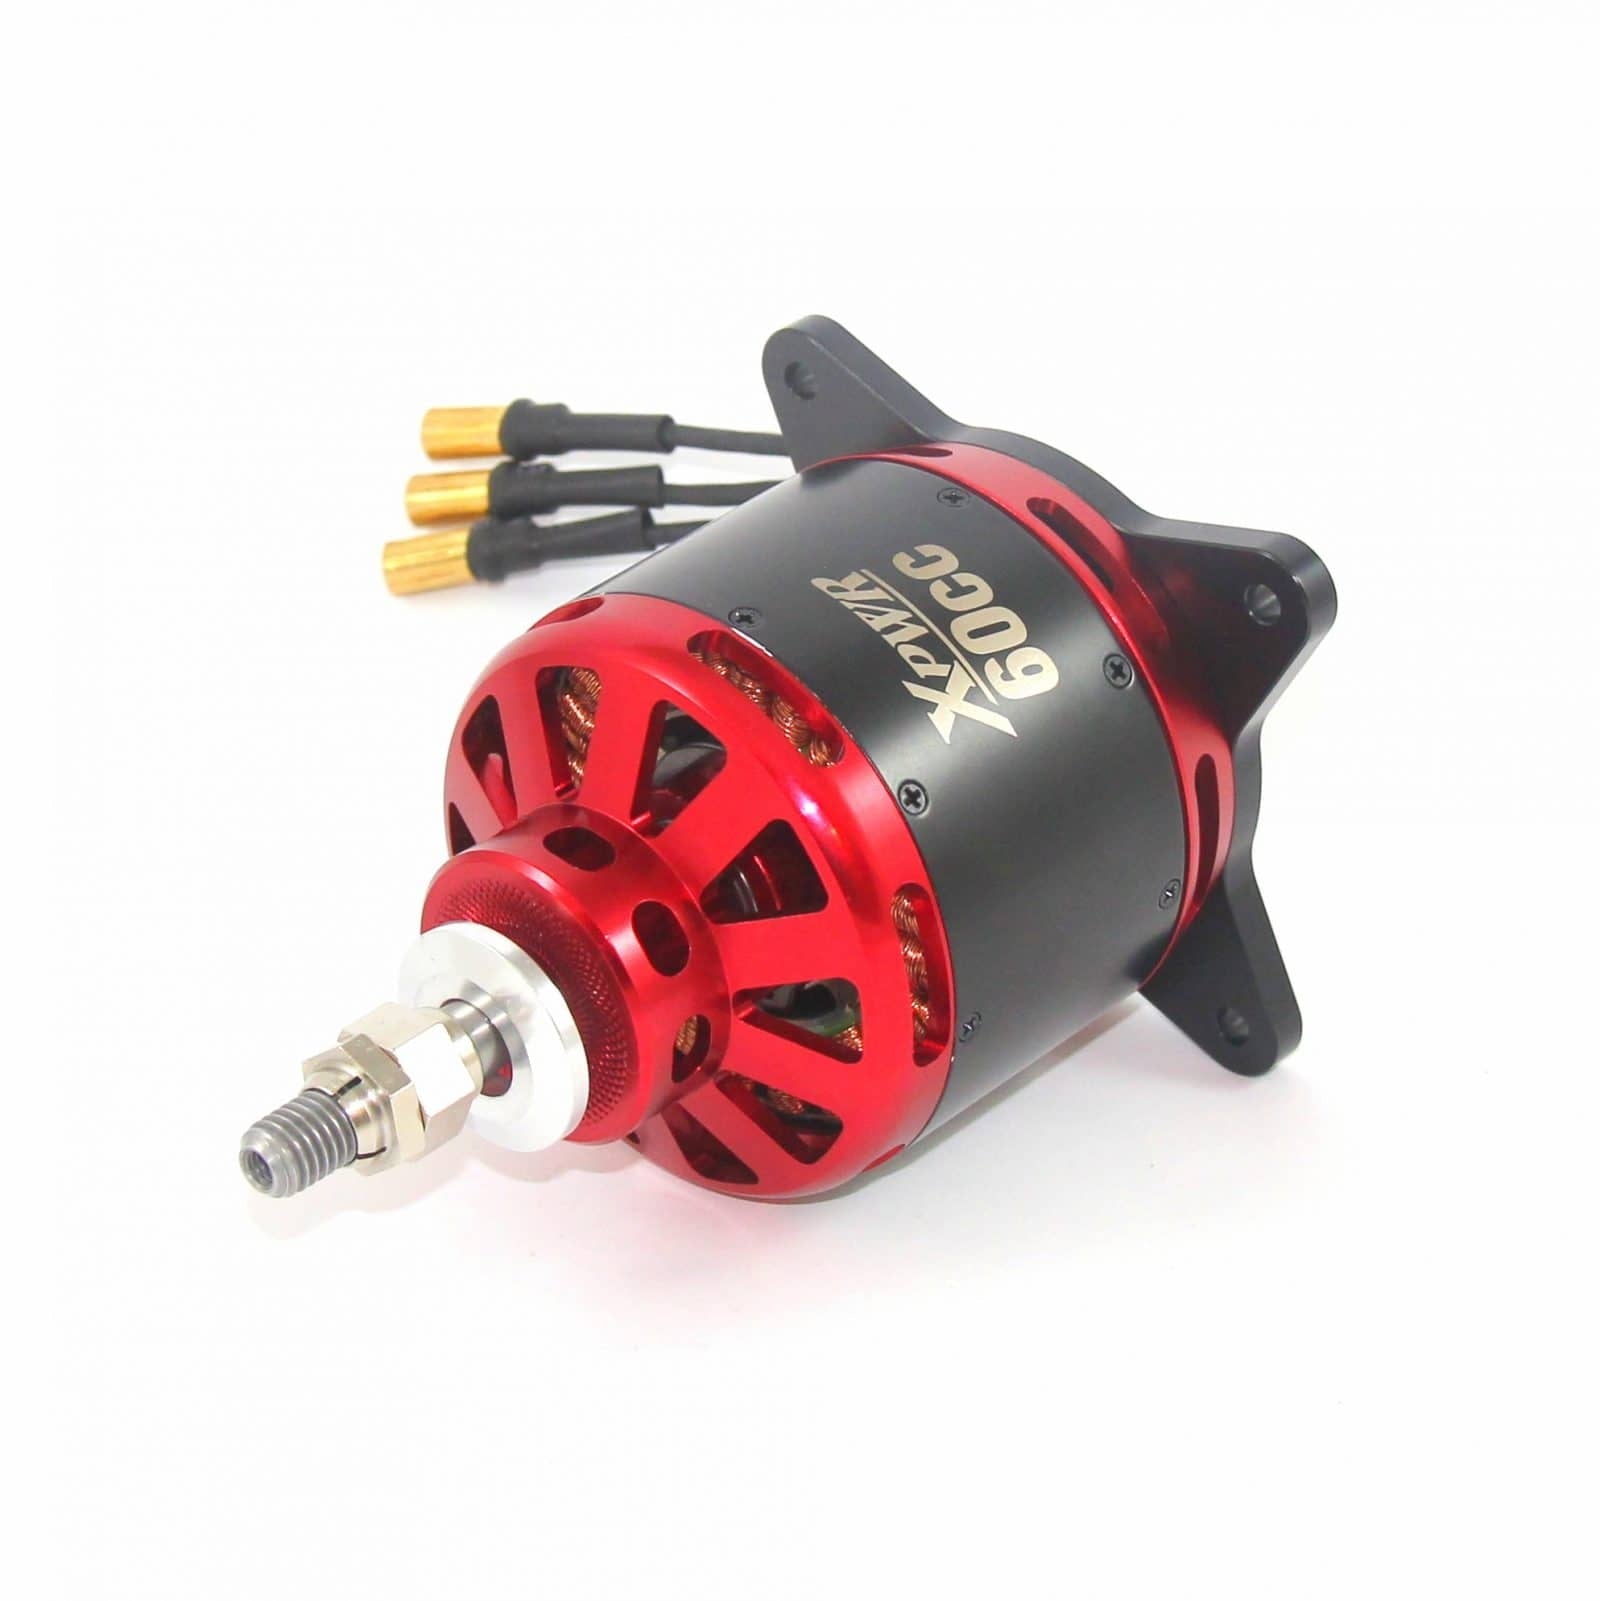 Xpwr 60CC Motor from Extreme Flight XPWR-60CC